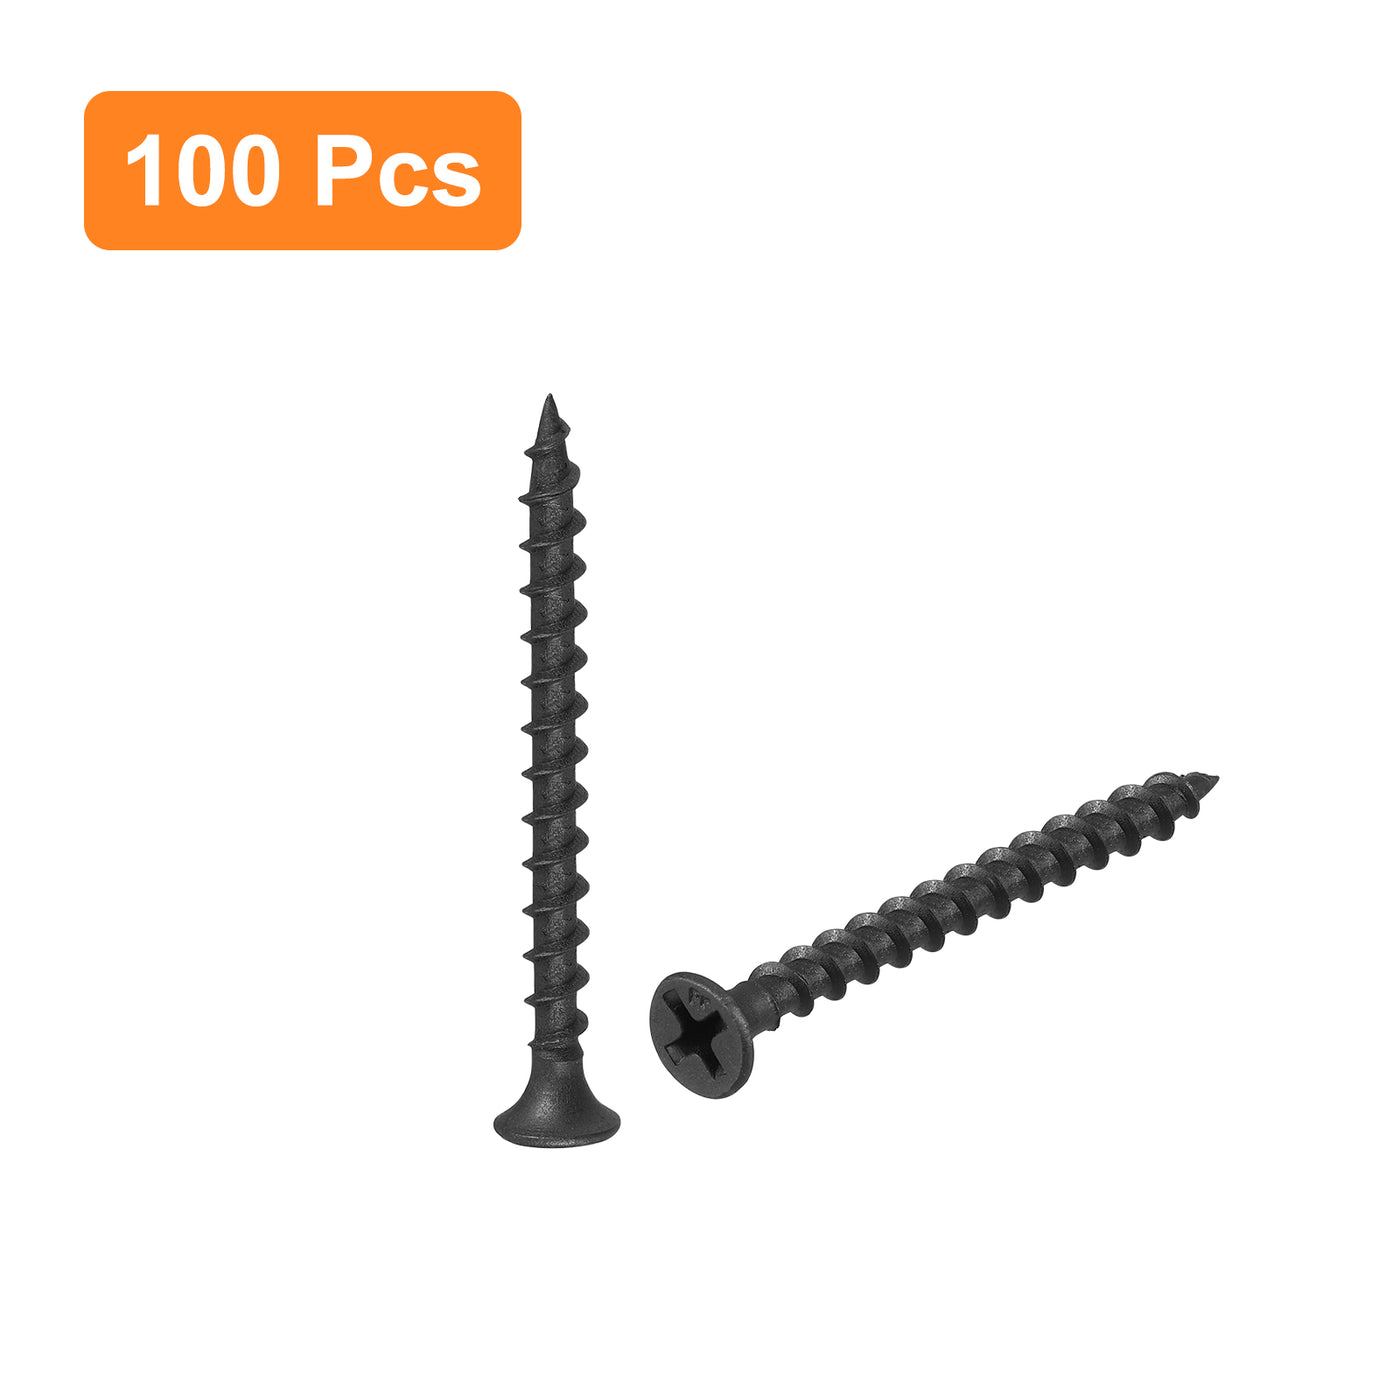 uxcell Uxcell M3.8x45mm 100pcs Phillips Drive Wood Screws, Carbon Steel Self Tapping Screws